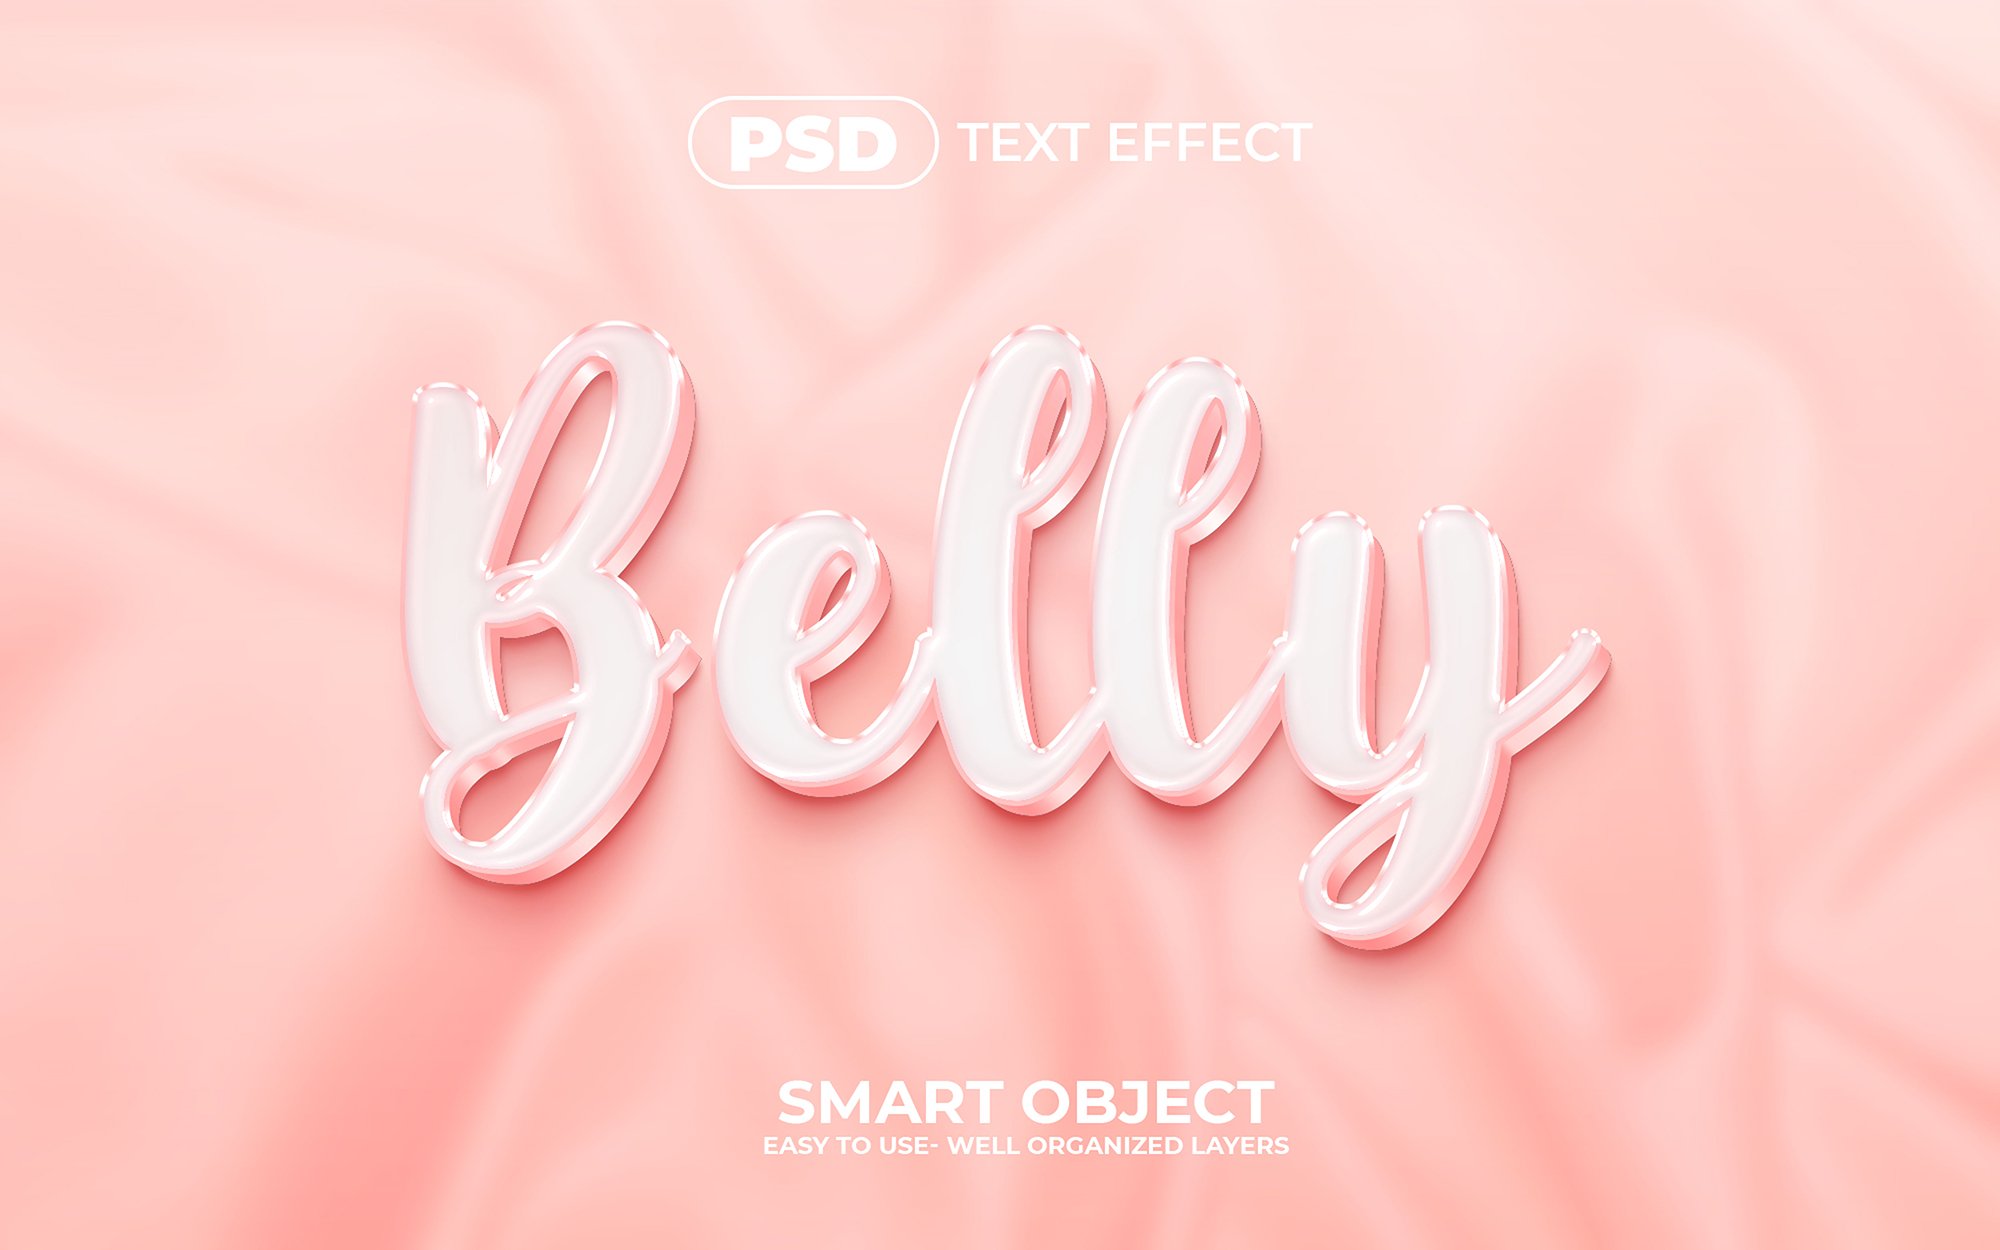 Belly 3D Editable Text Effect Stylecover image.